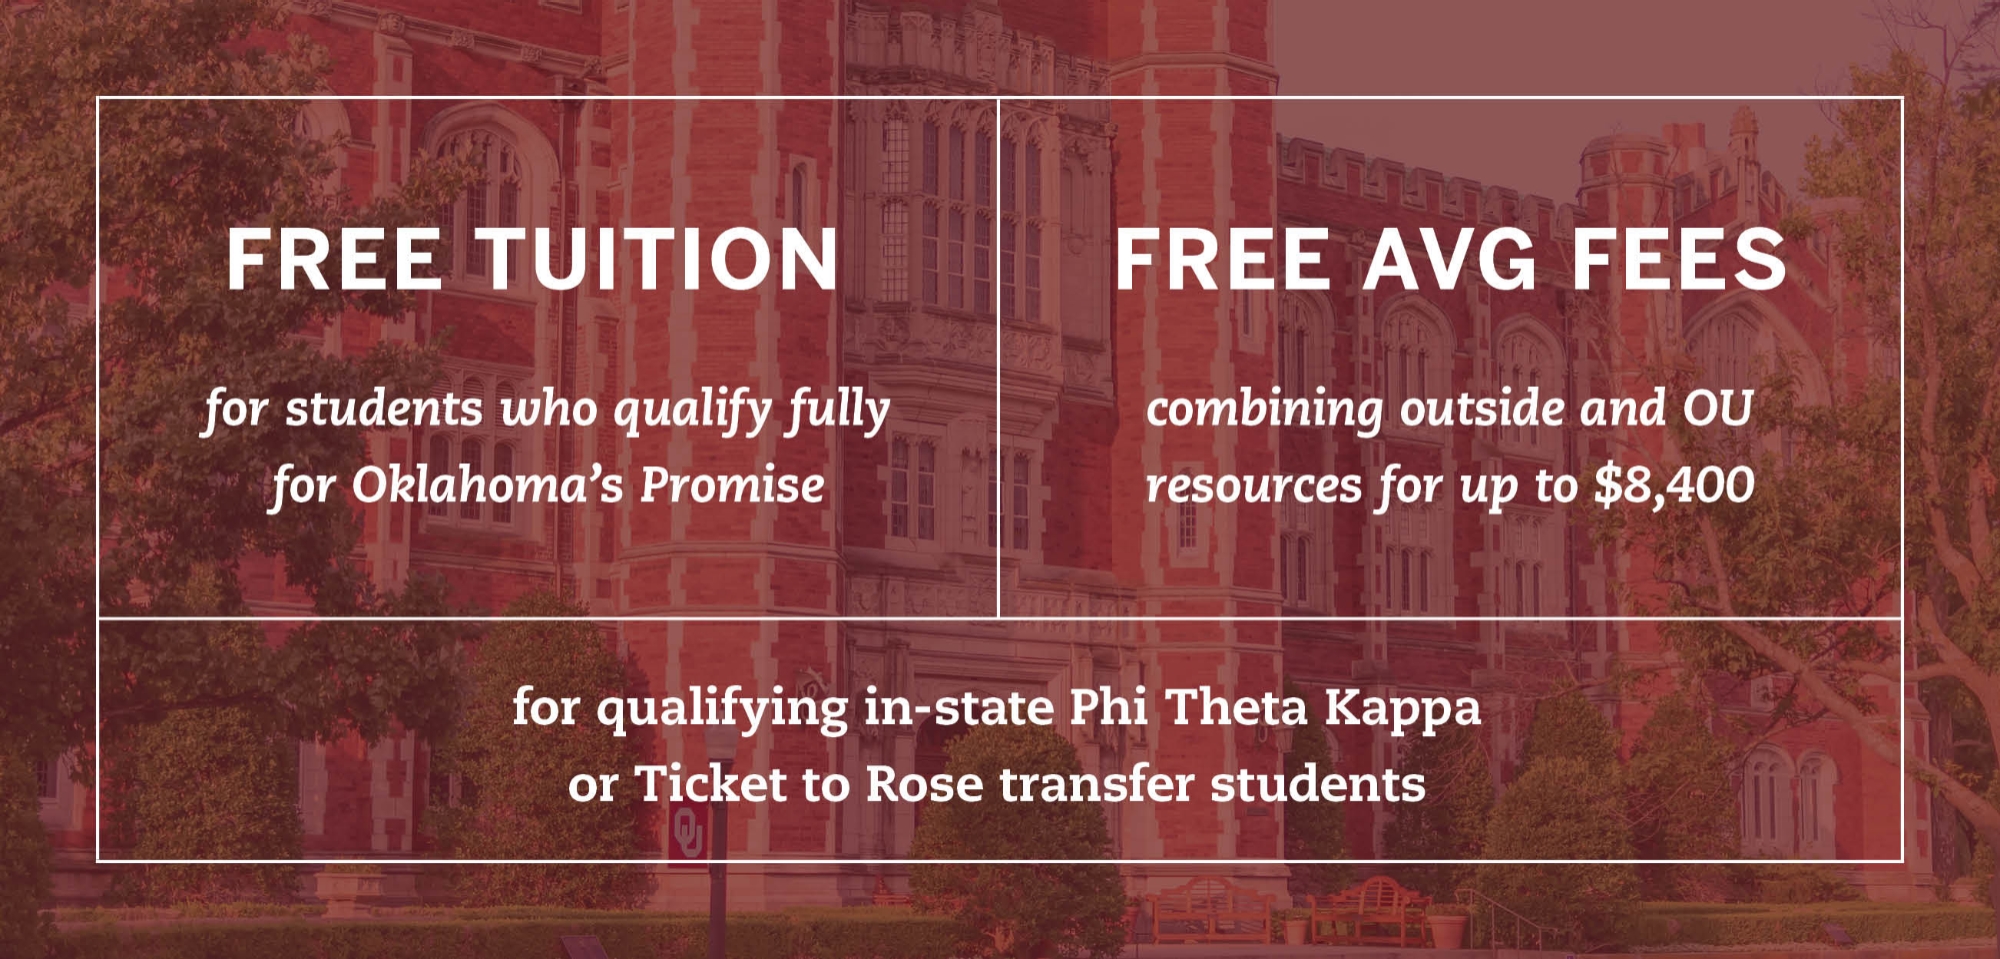 Crimson Commitment: Free tuition for students who qualify fully for Oklahoma's Promise, free average fees combining outside and OU resources for up to $8,000 for qualifying in-state Phi Theta Kappa or Ticket to Rose transfer students